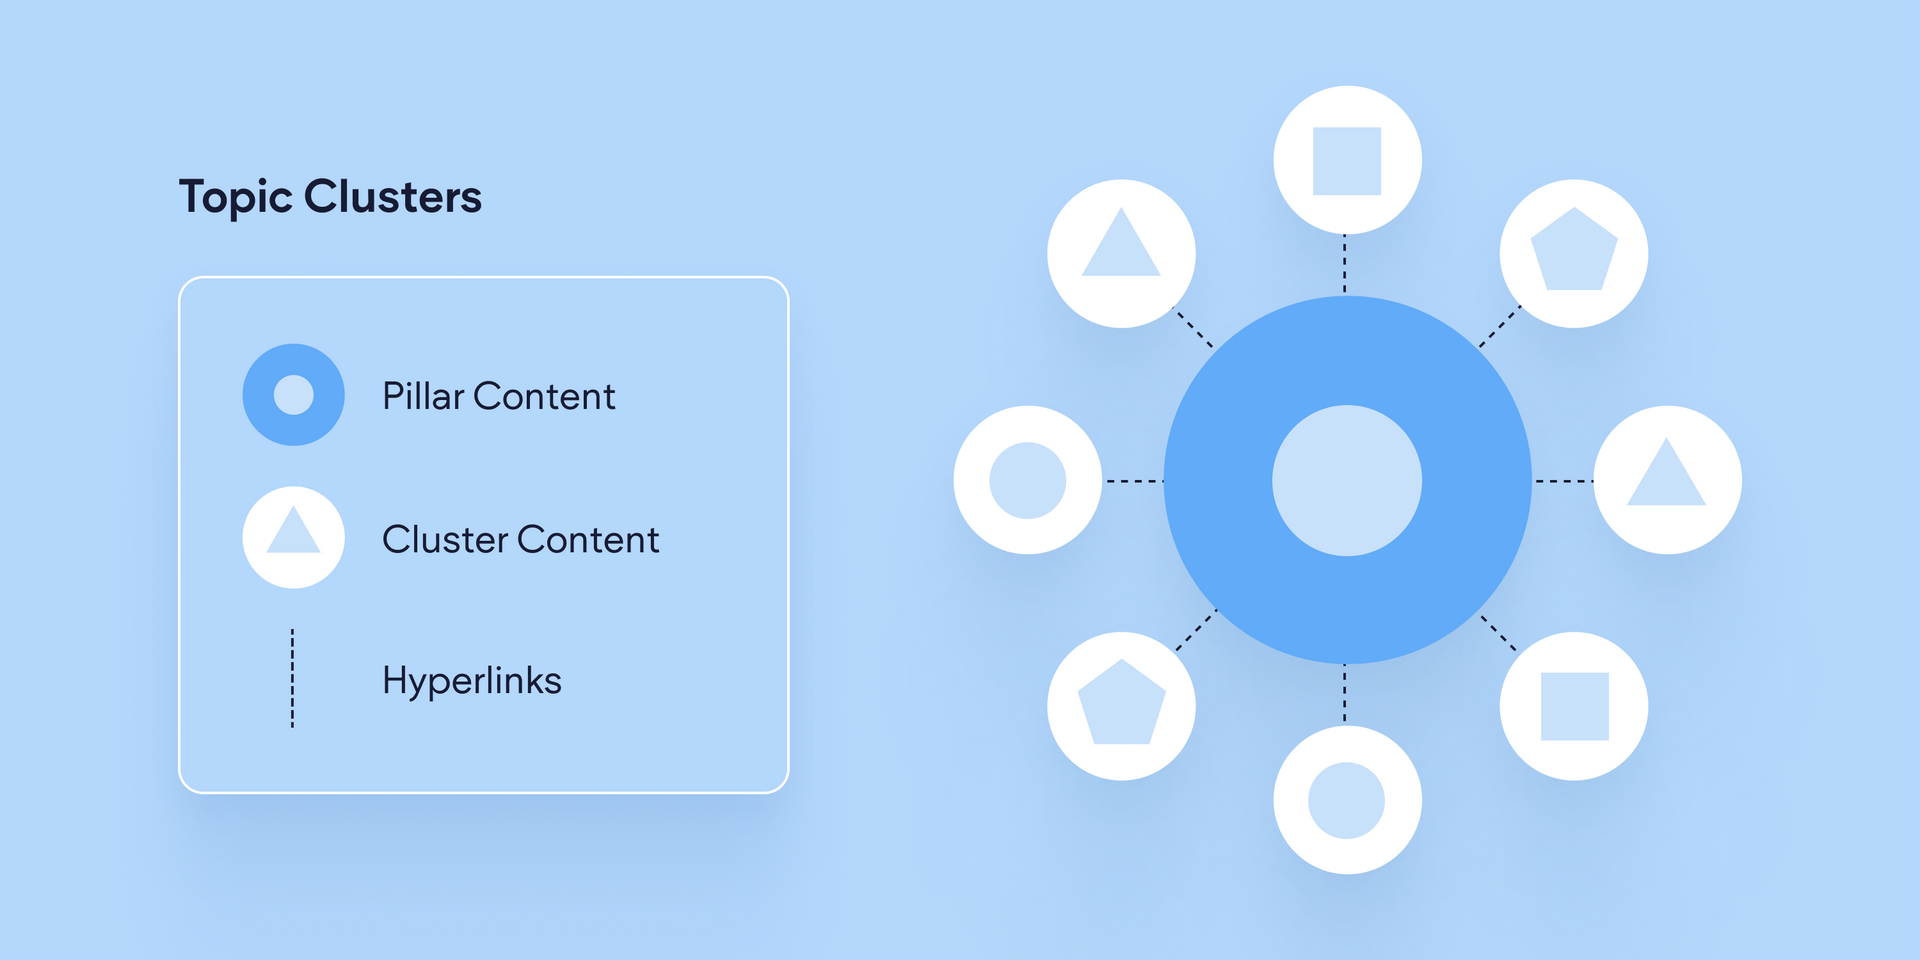 a diagram of topic clusters with pillar content, cluster content, and hyperlinks